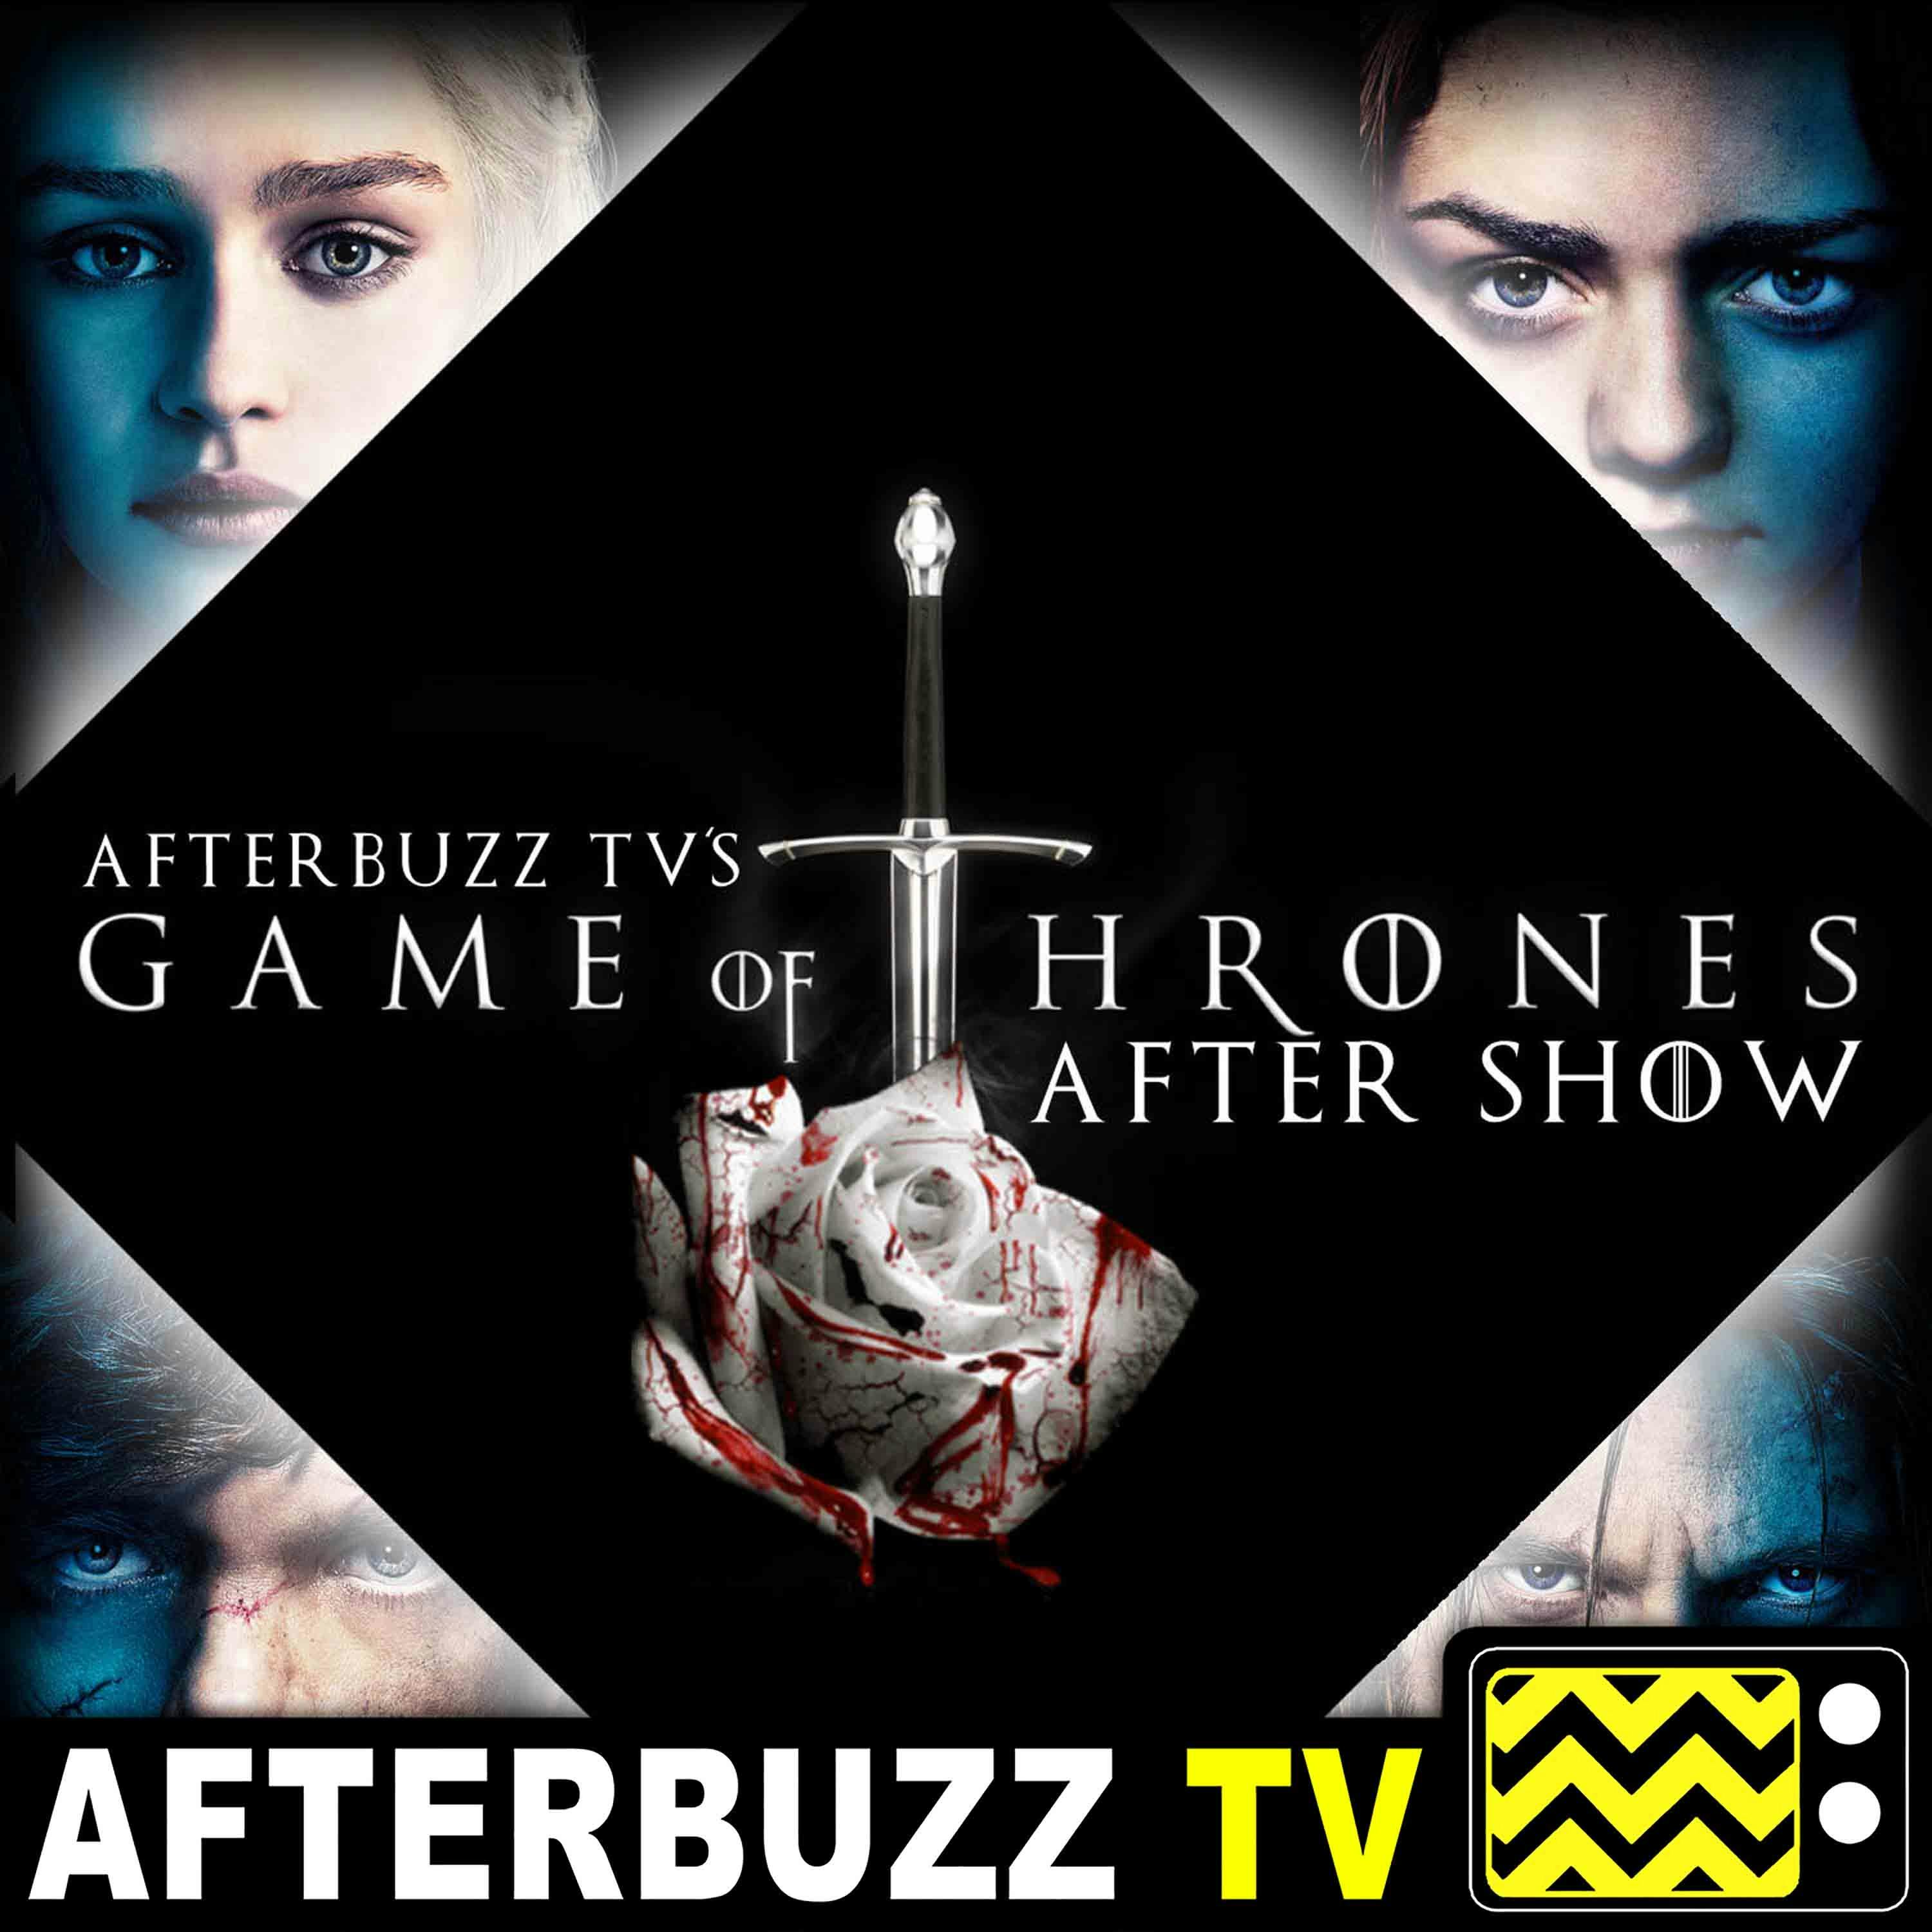 Game of Thrones S:4 | Oathkeeper E:4 | AfterBuzz TV AfterShow